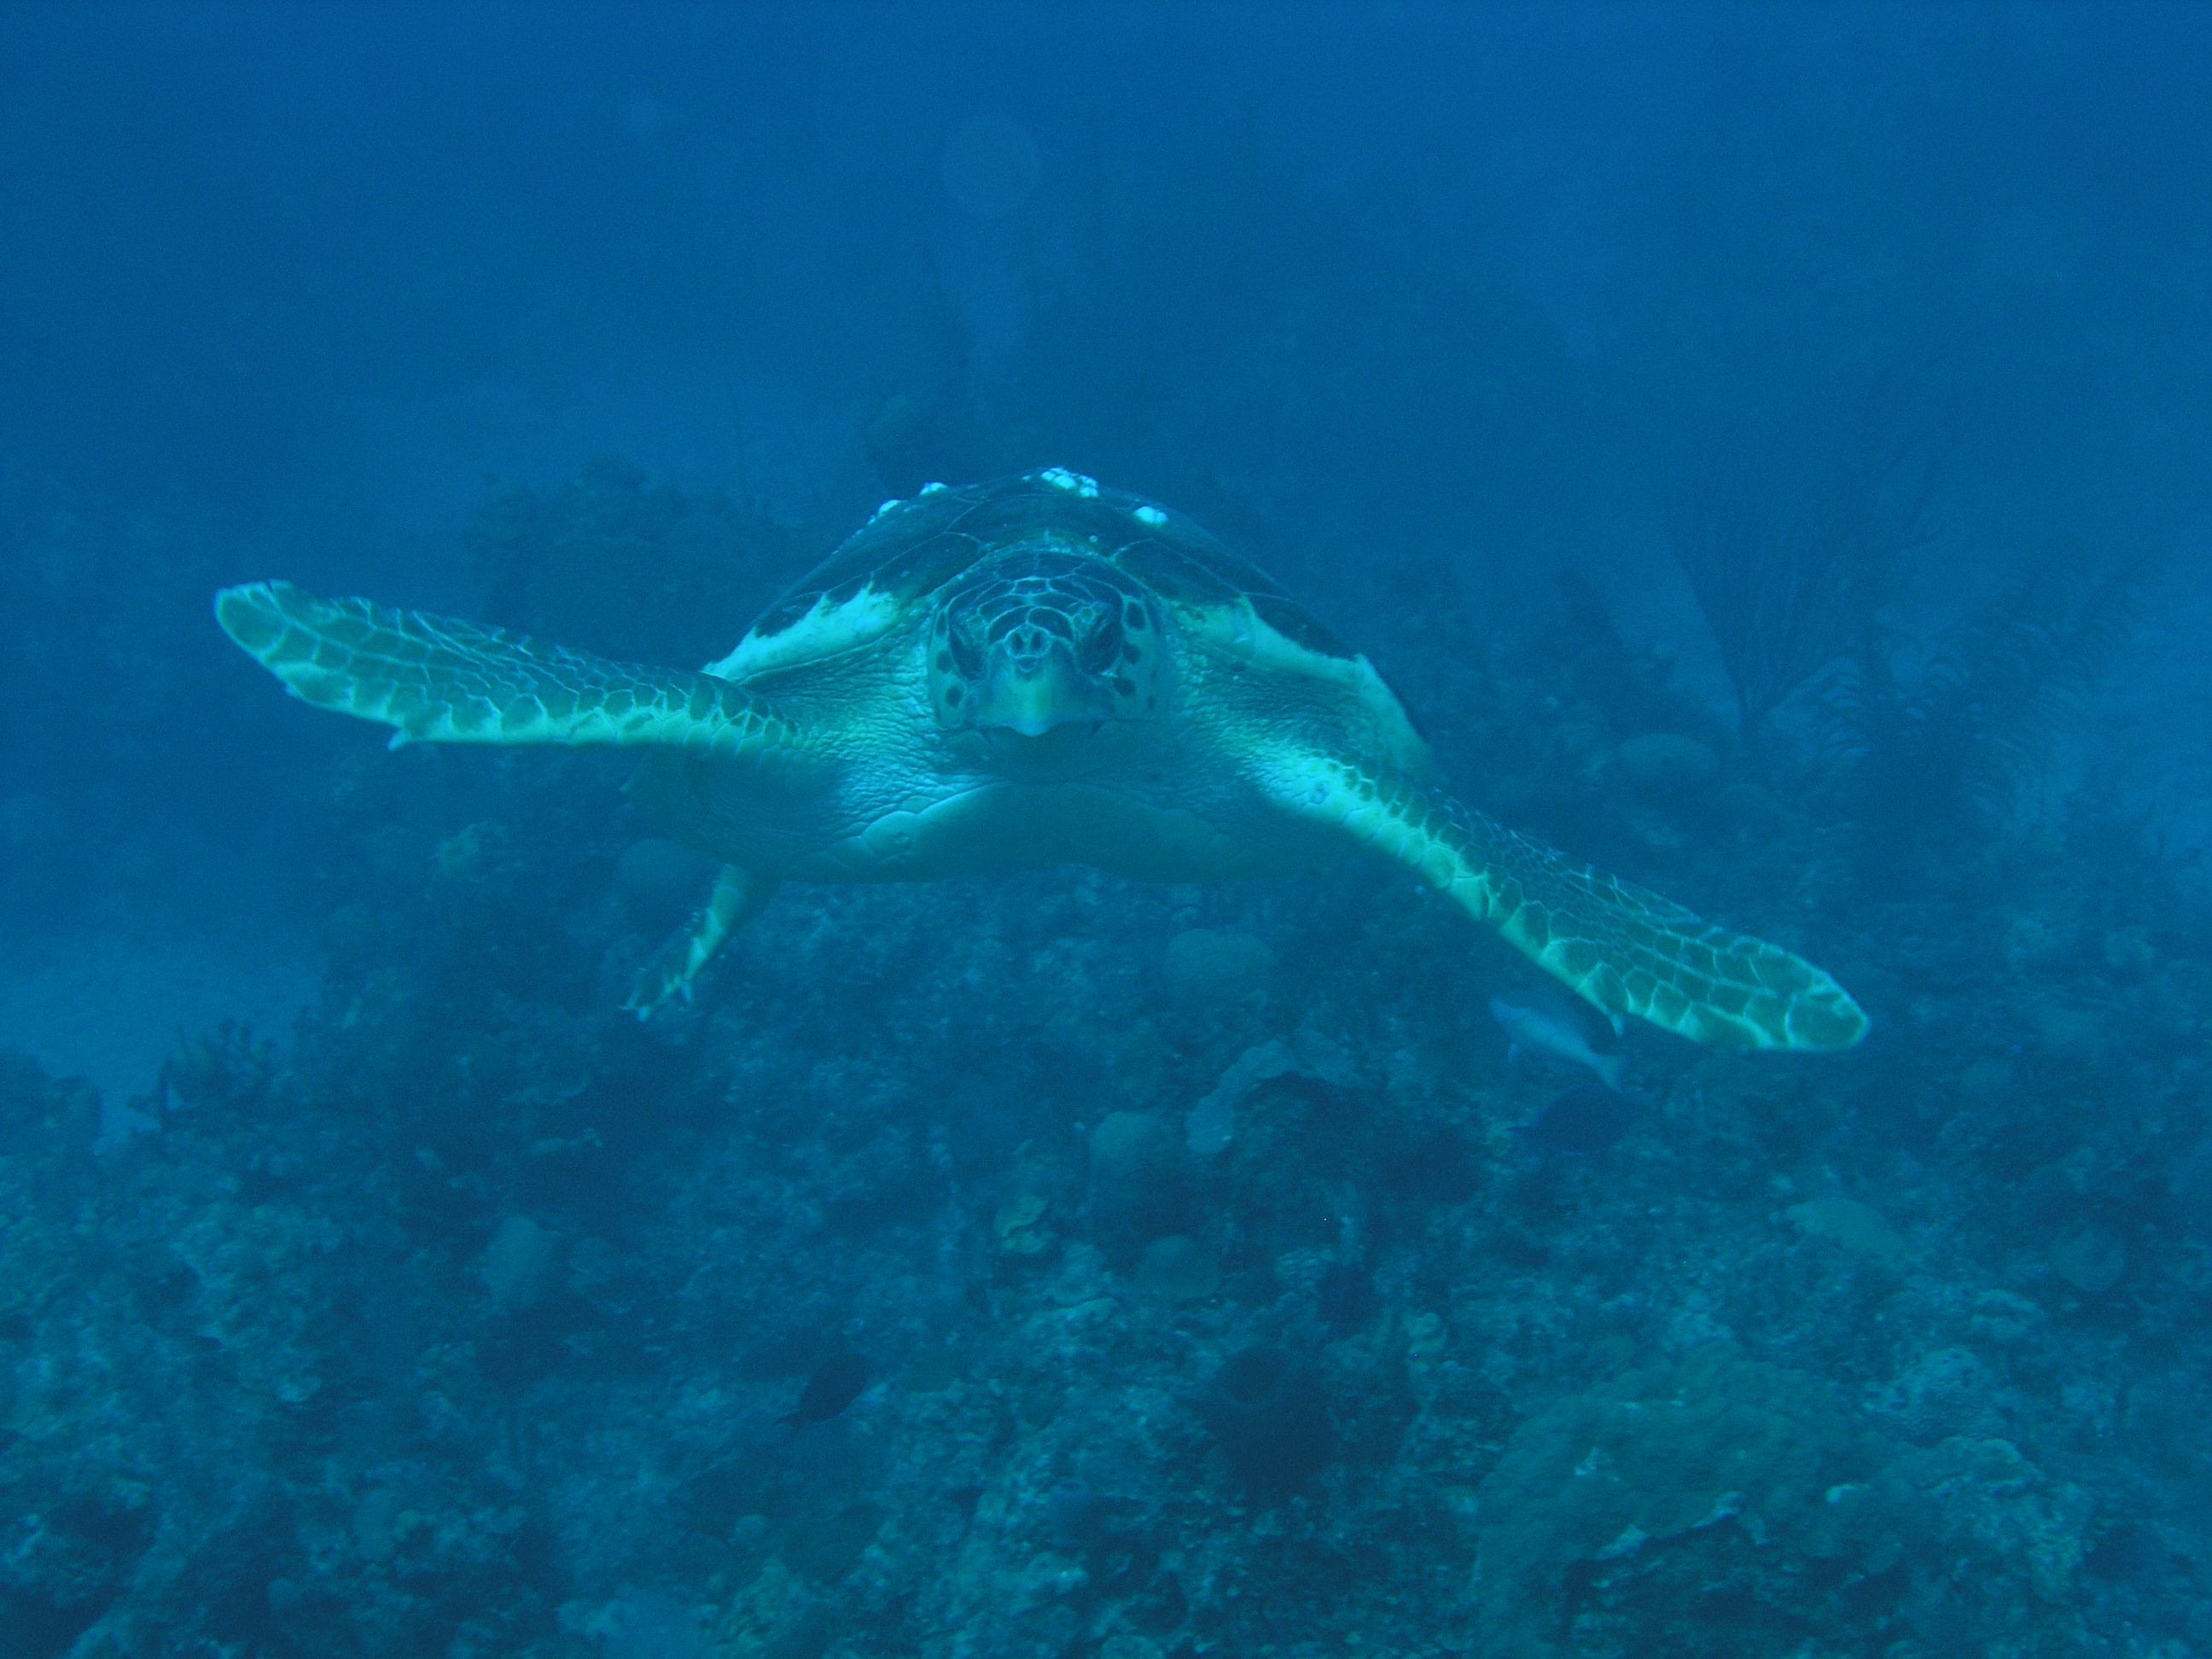 Up close and personal with a turtle